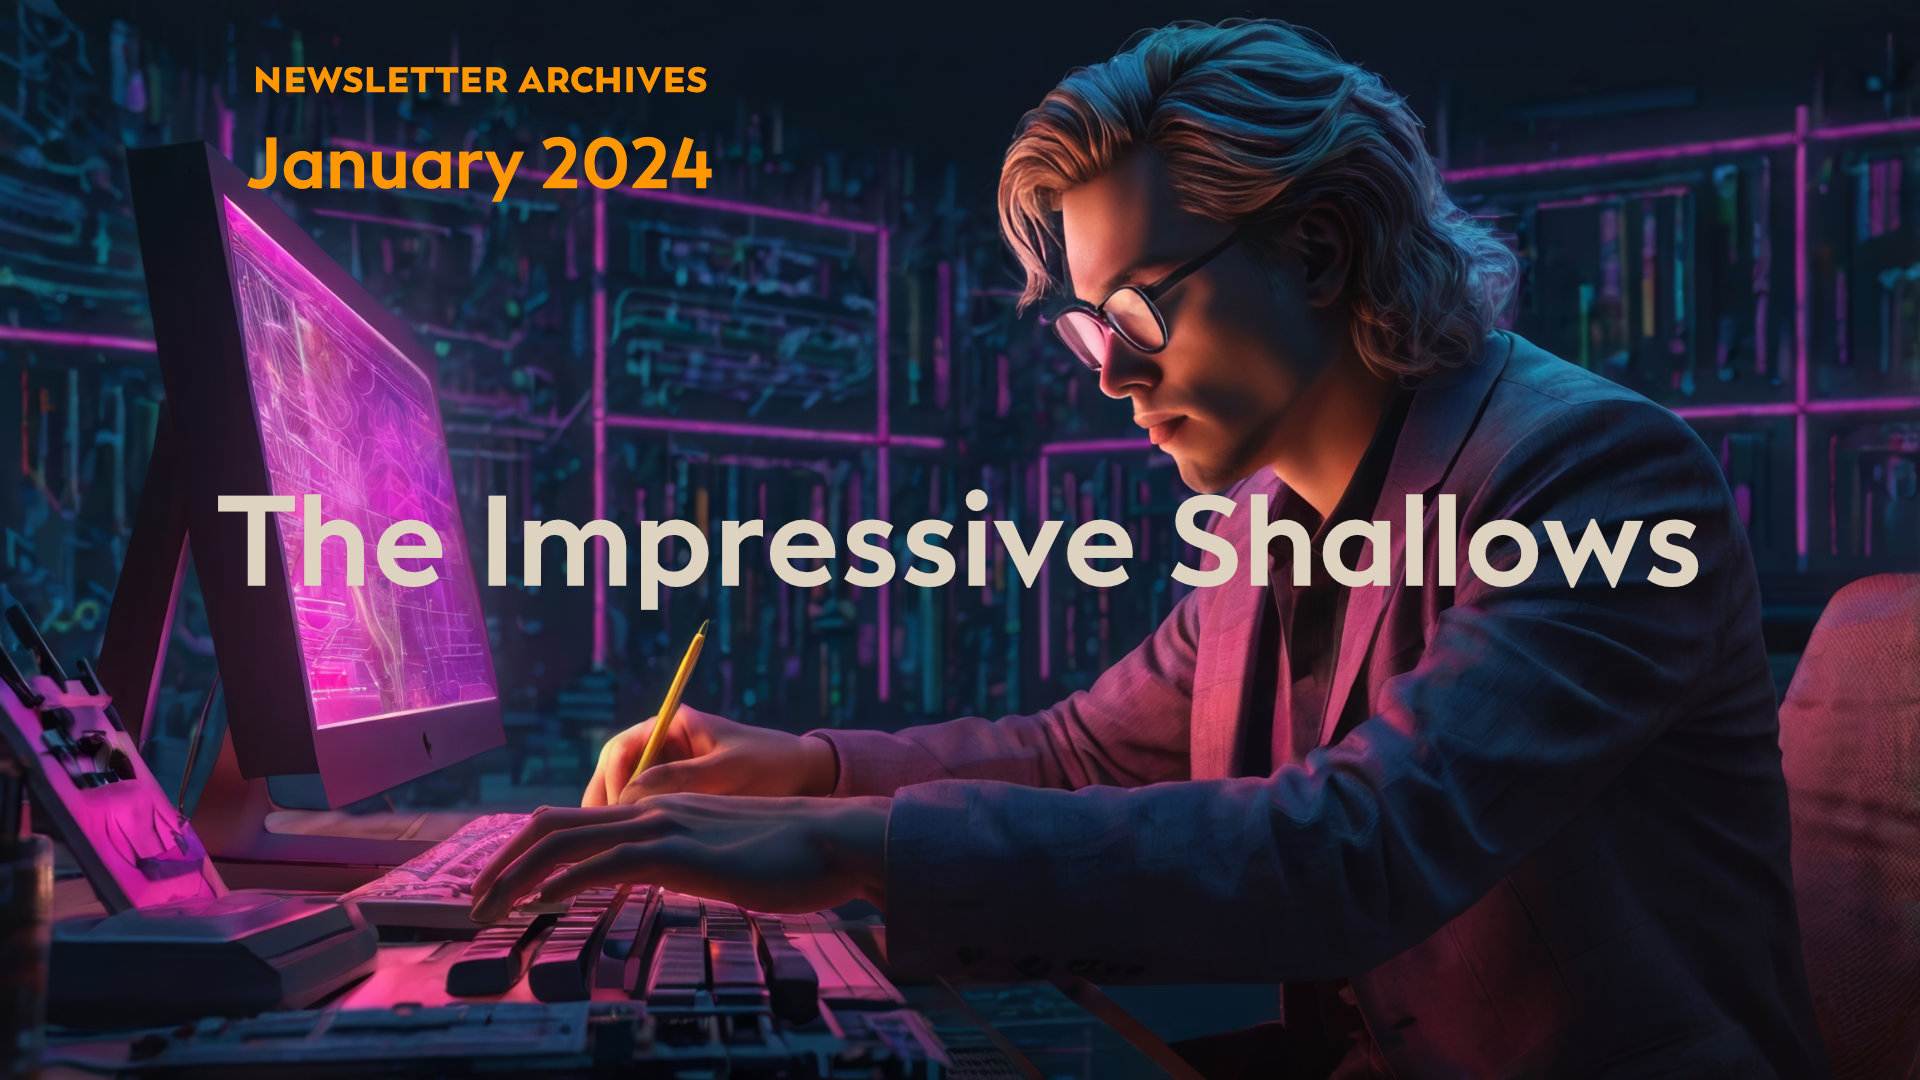 A person in glasses works on a computer in a dimly lit room with neon lights. Text reads, "The Impressive Shallows: Newsletter Archives January 2024.